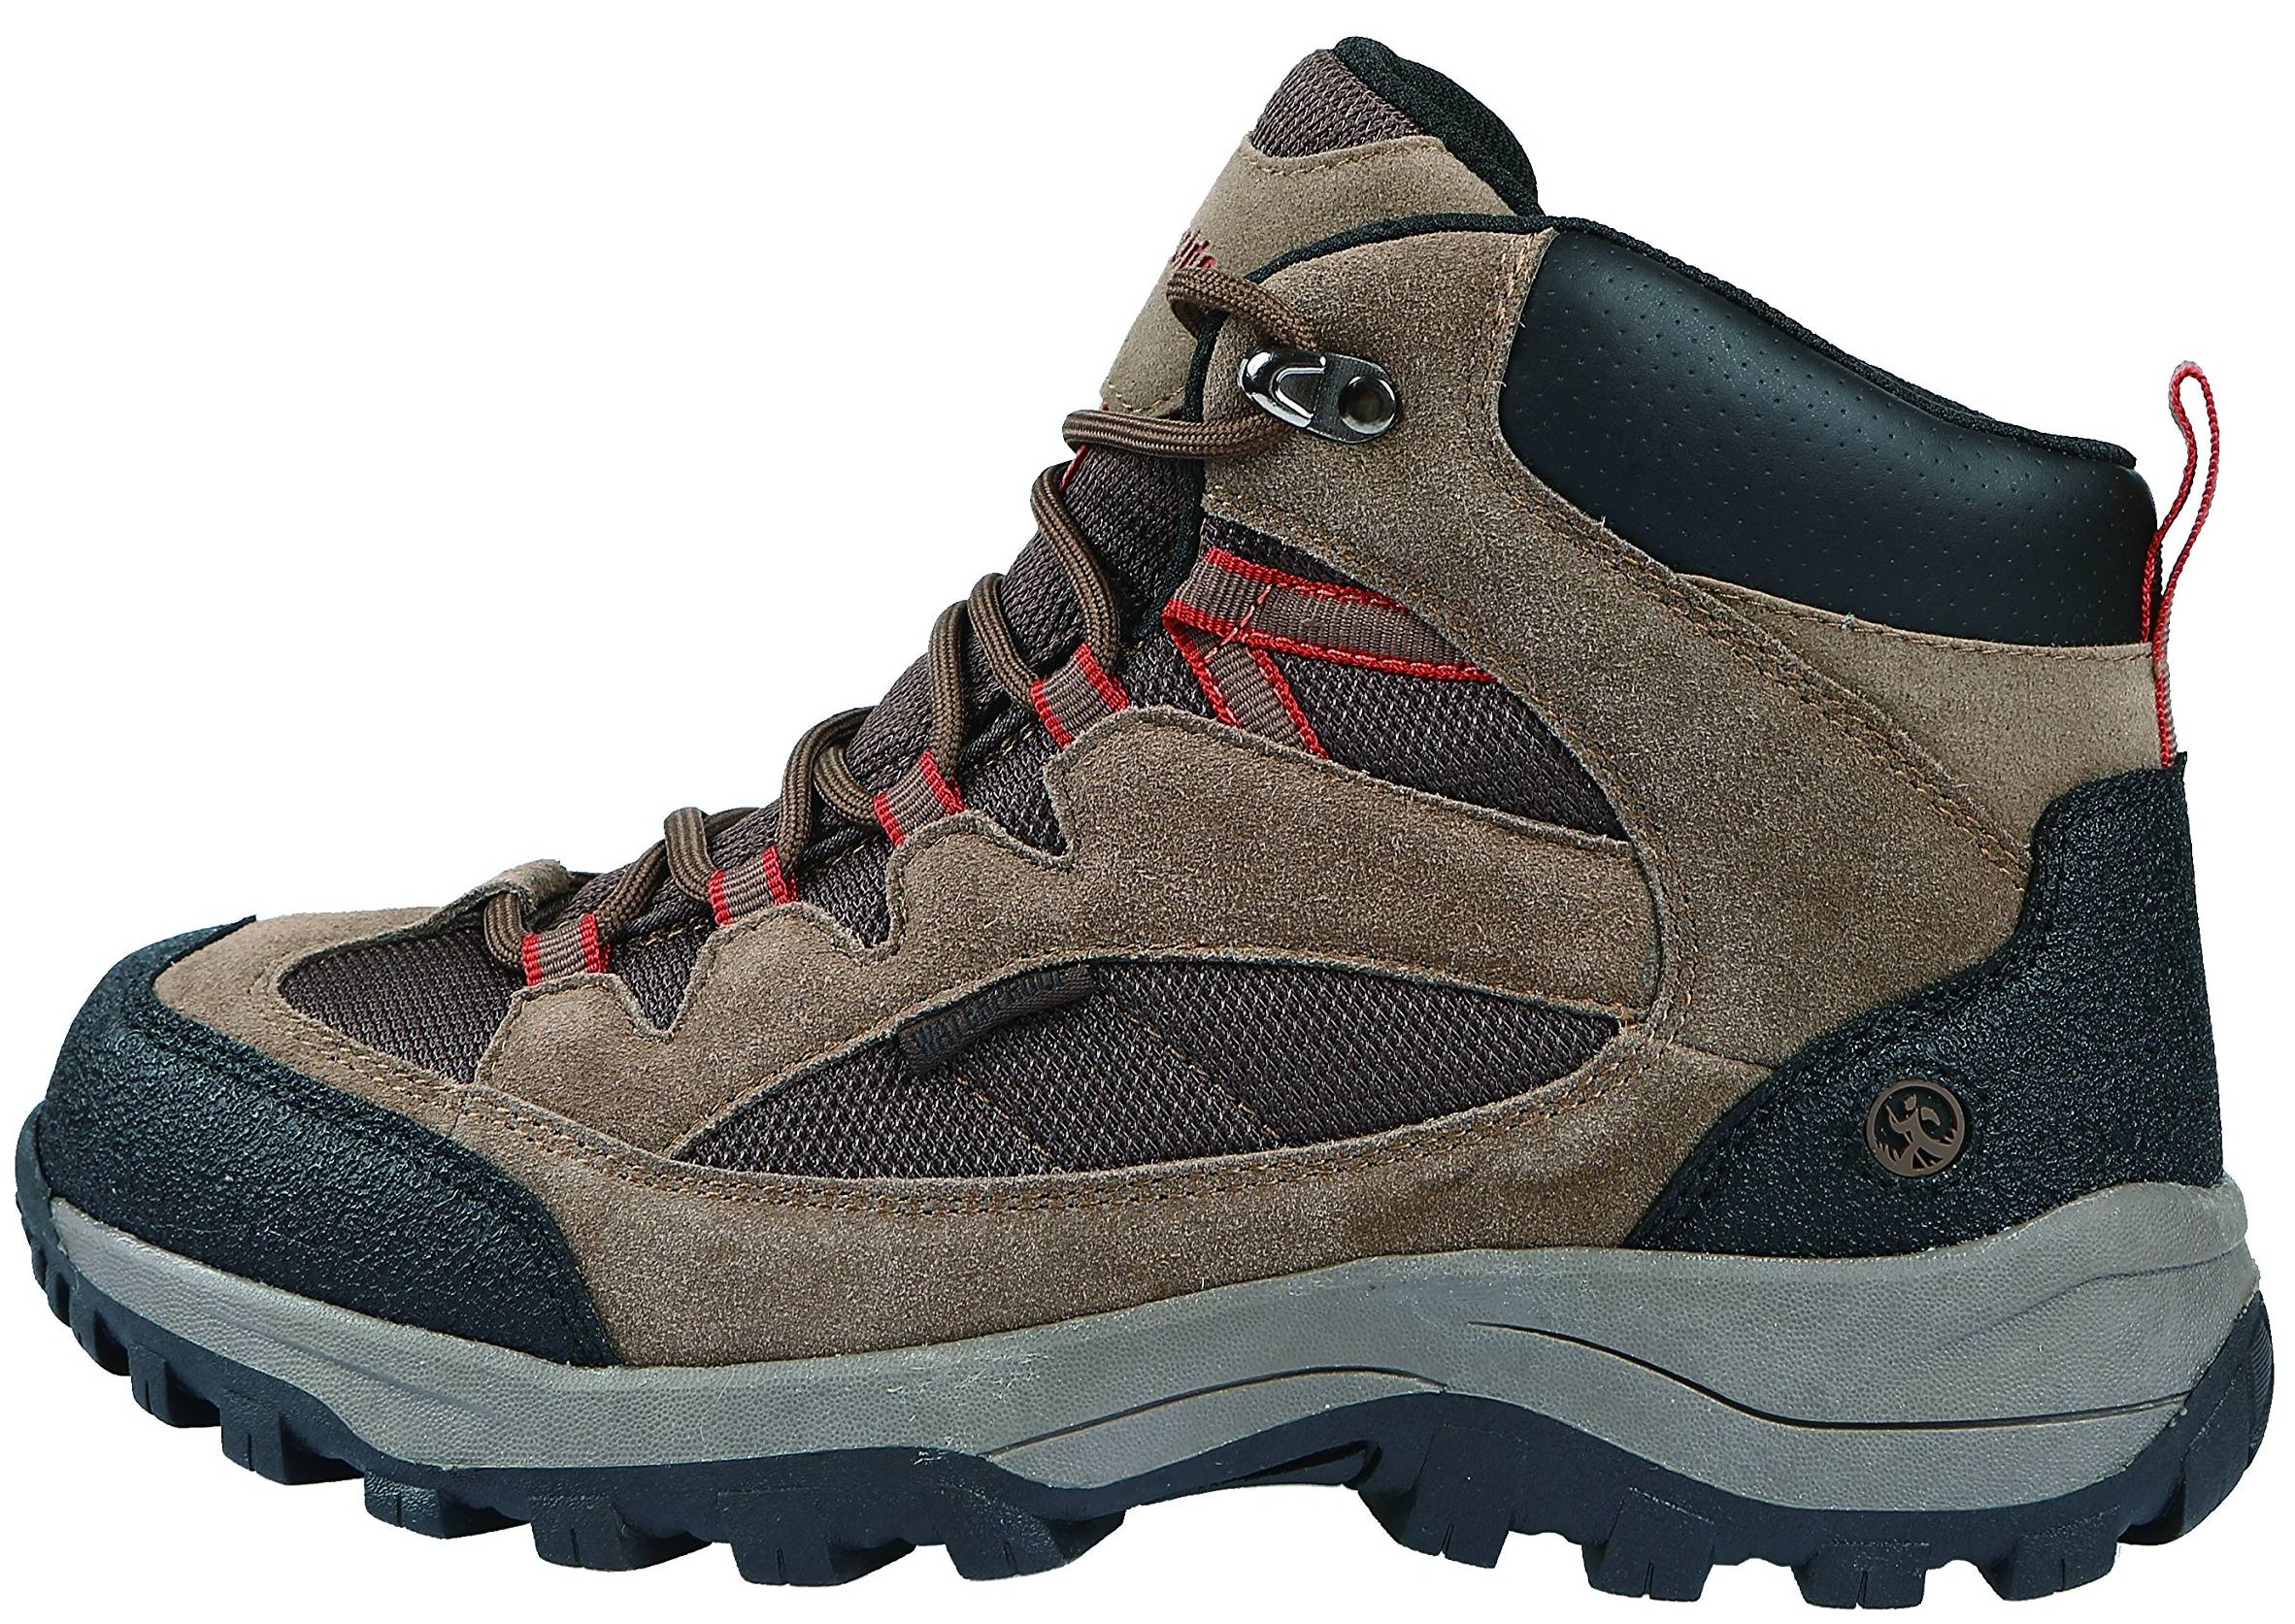 northside freemont hiking boots